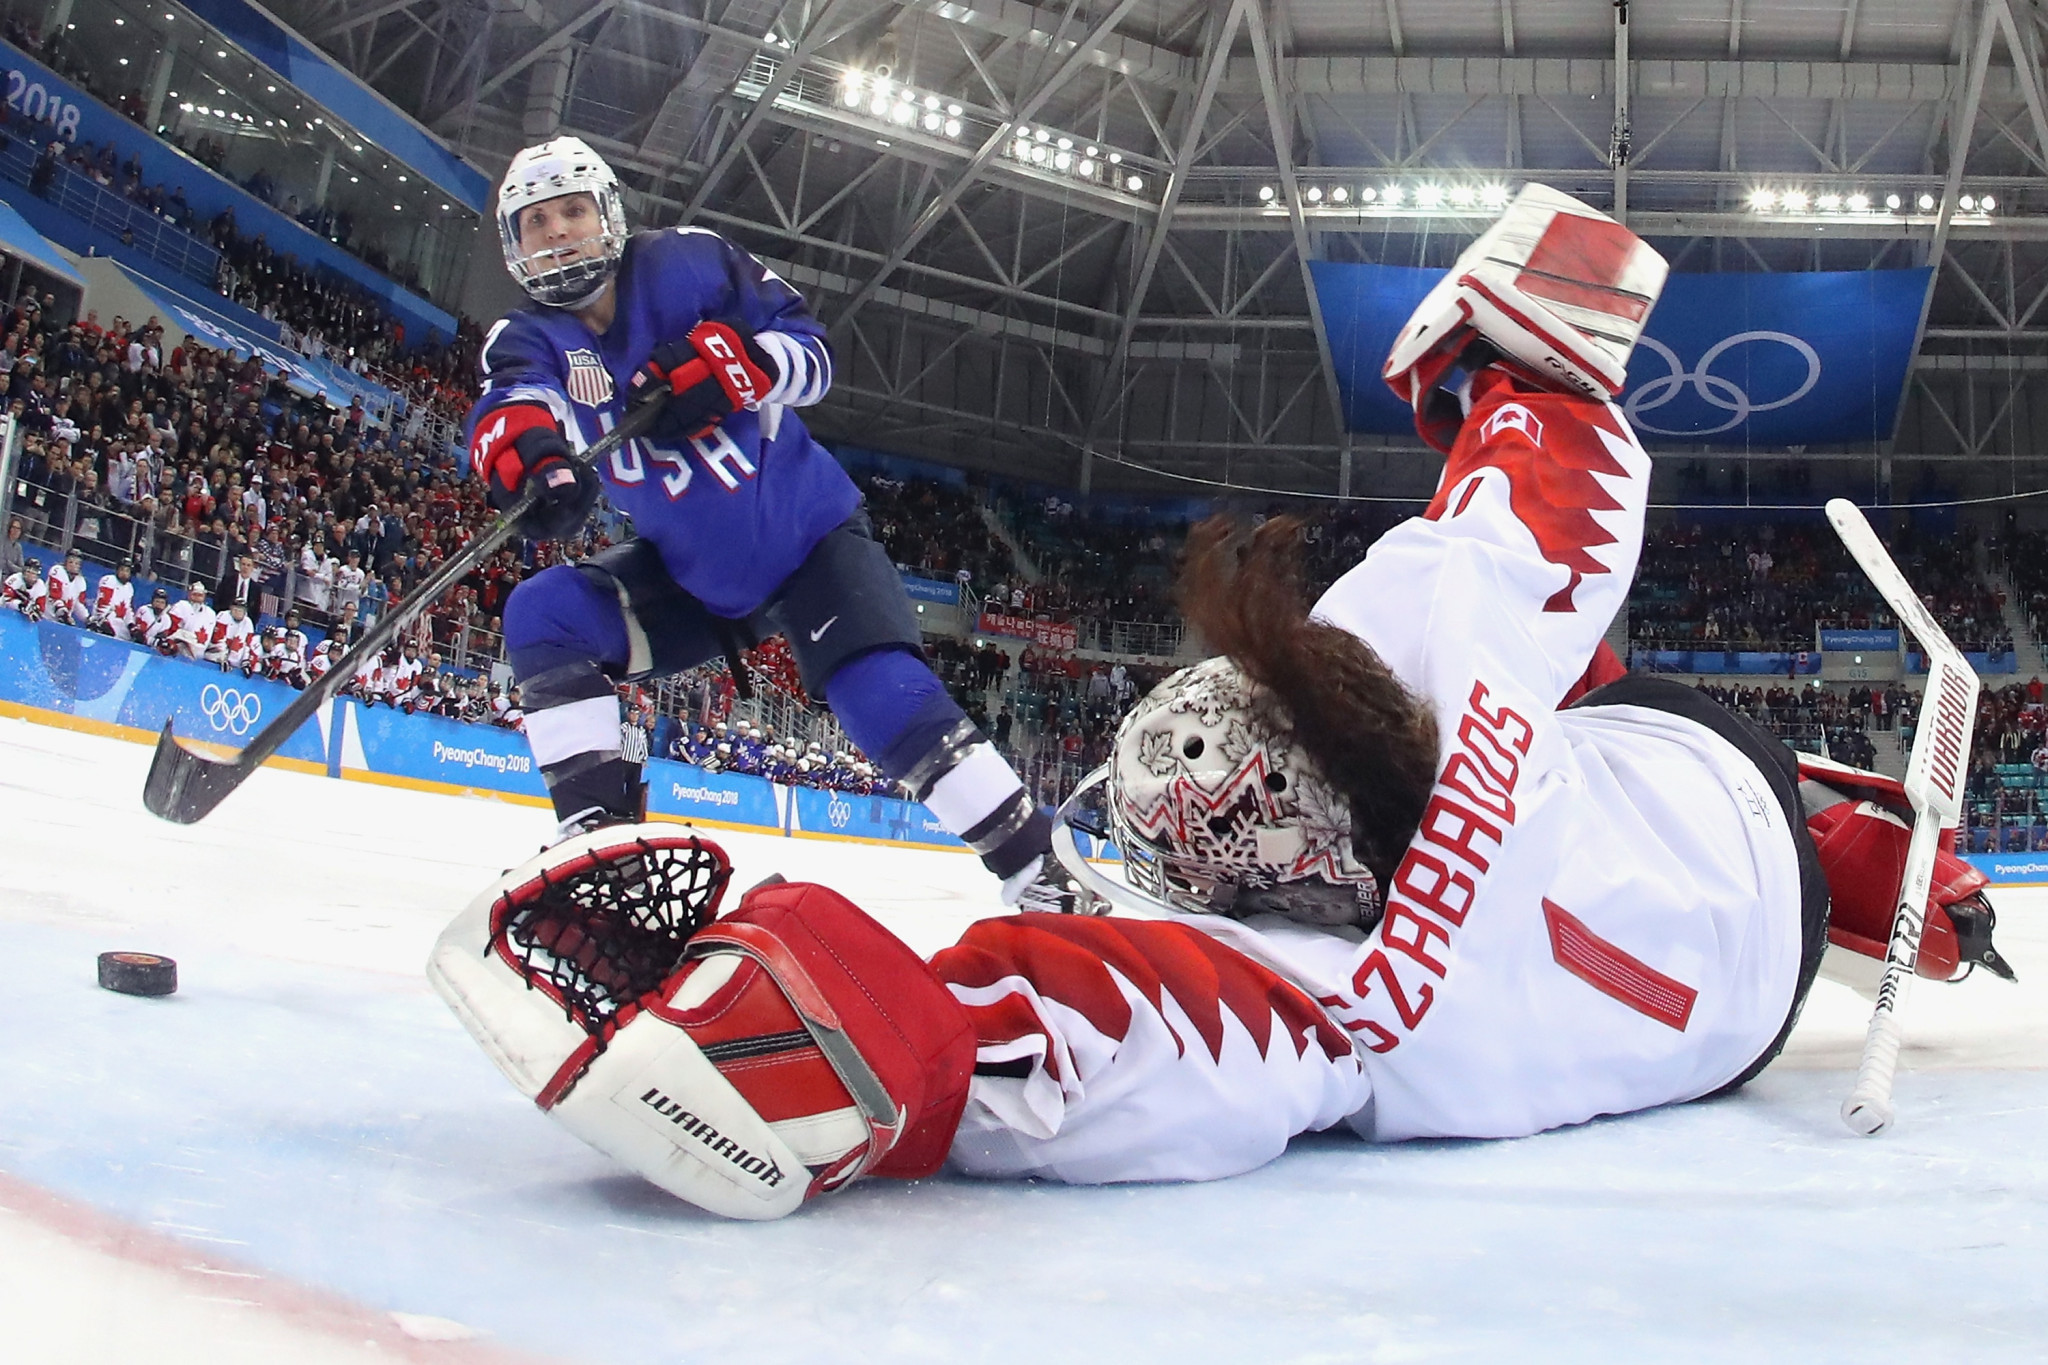 The International Ice Hockey Federation, meanwhile, is basing its Beijing 2022 qualification for the women’s tournament upon existing world rankings without holding the 2020 Women’s World Championship ©Getty Images